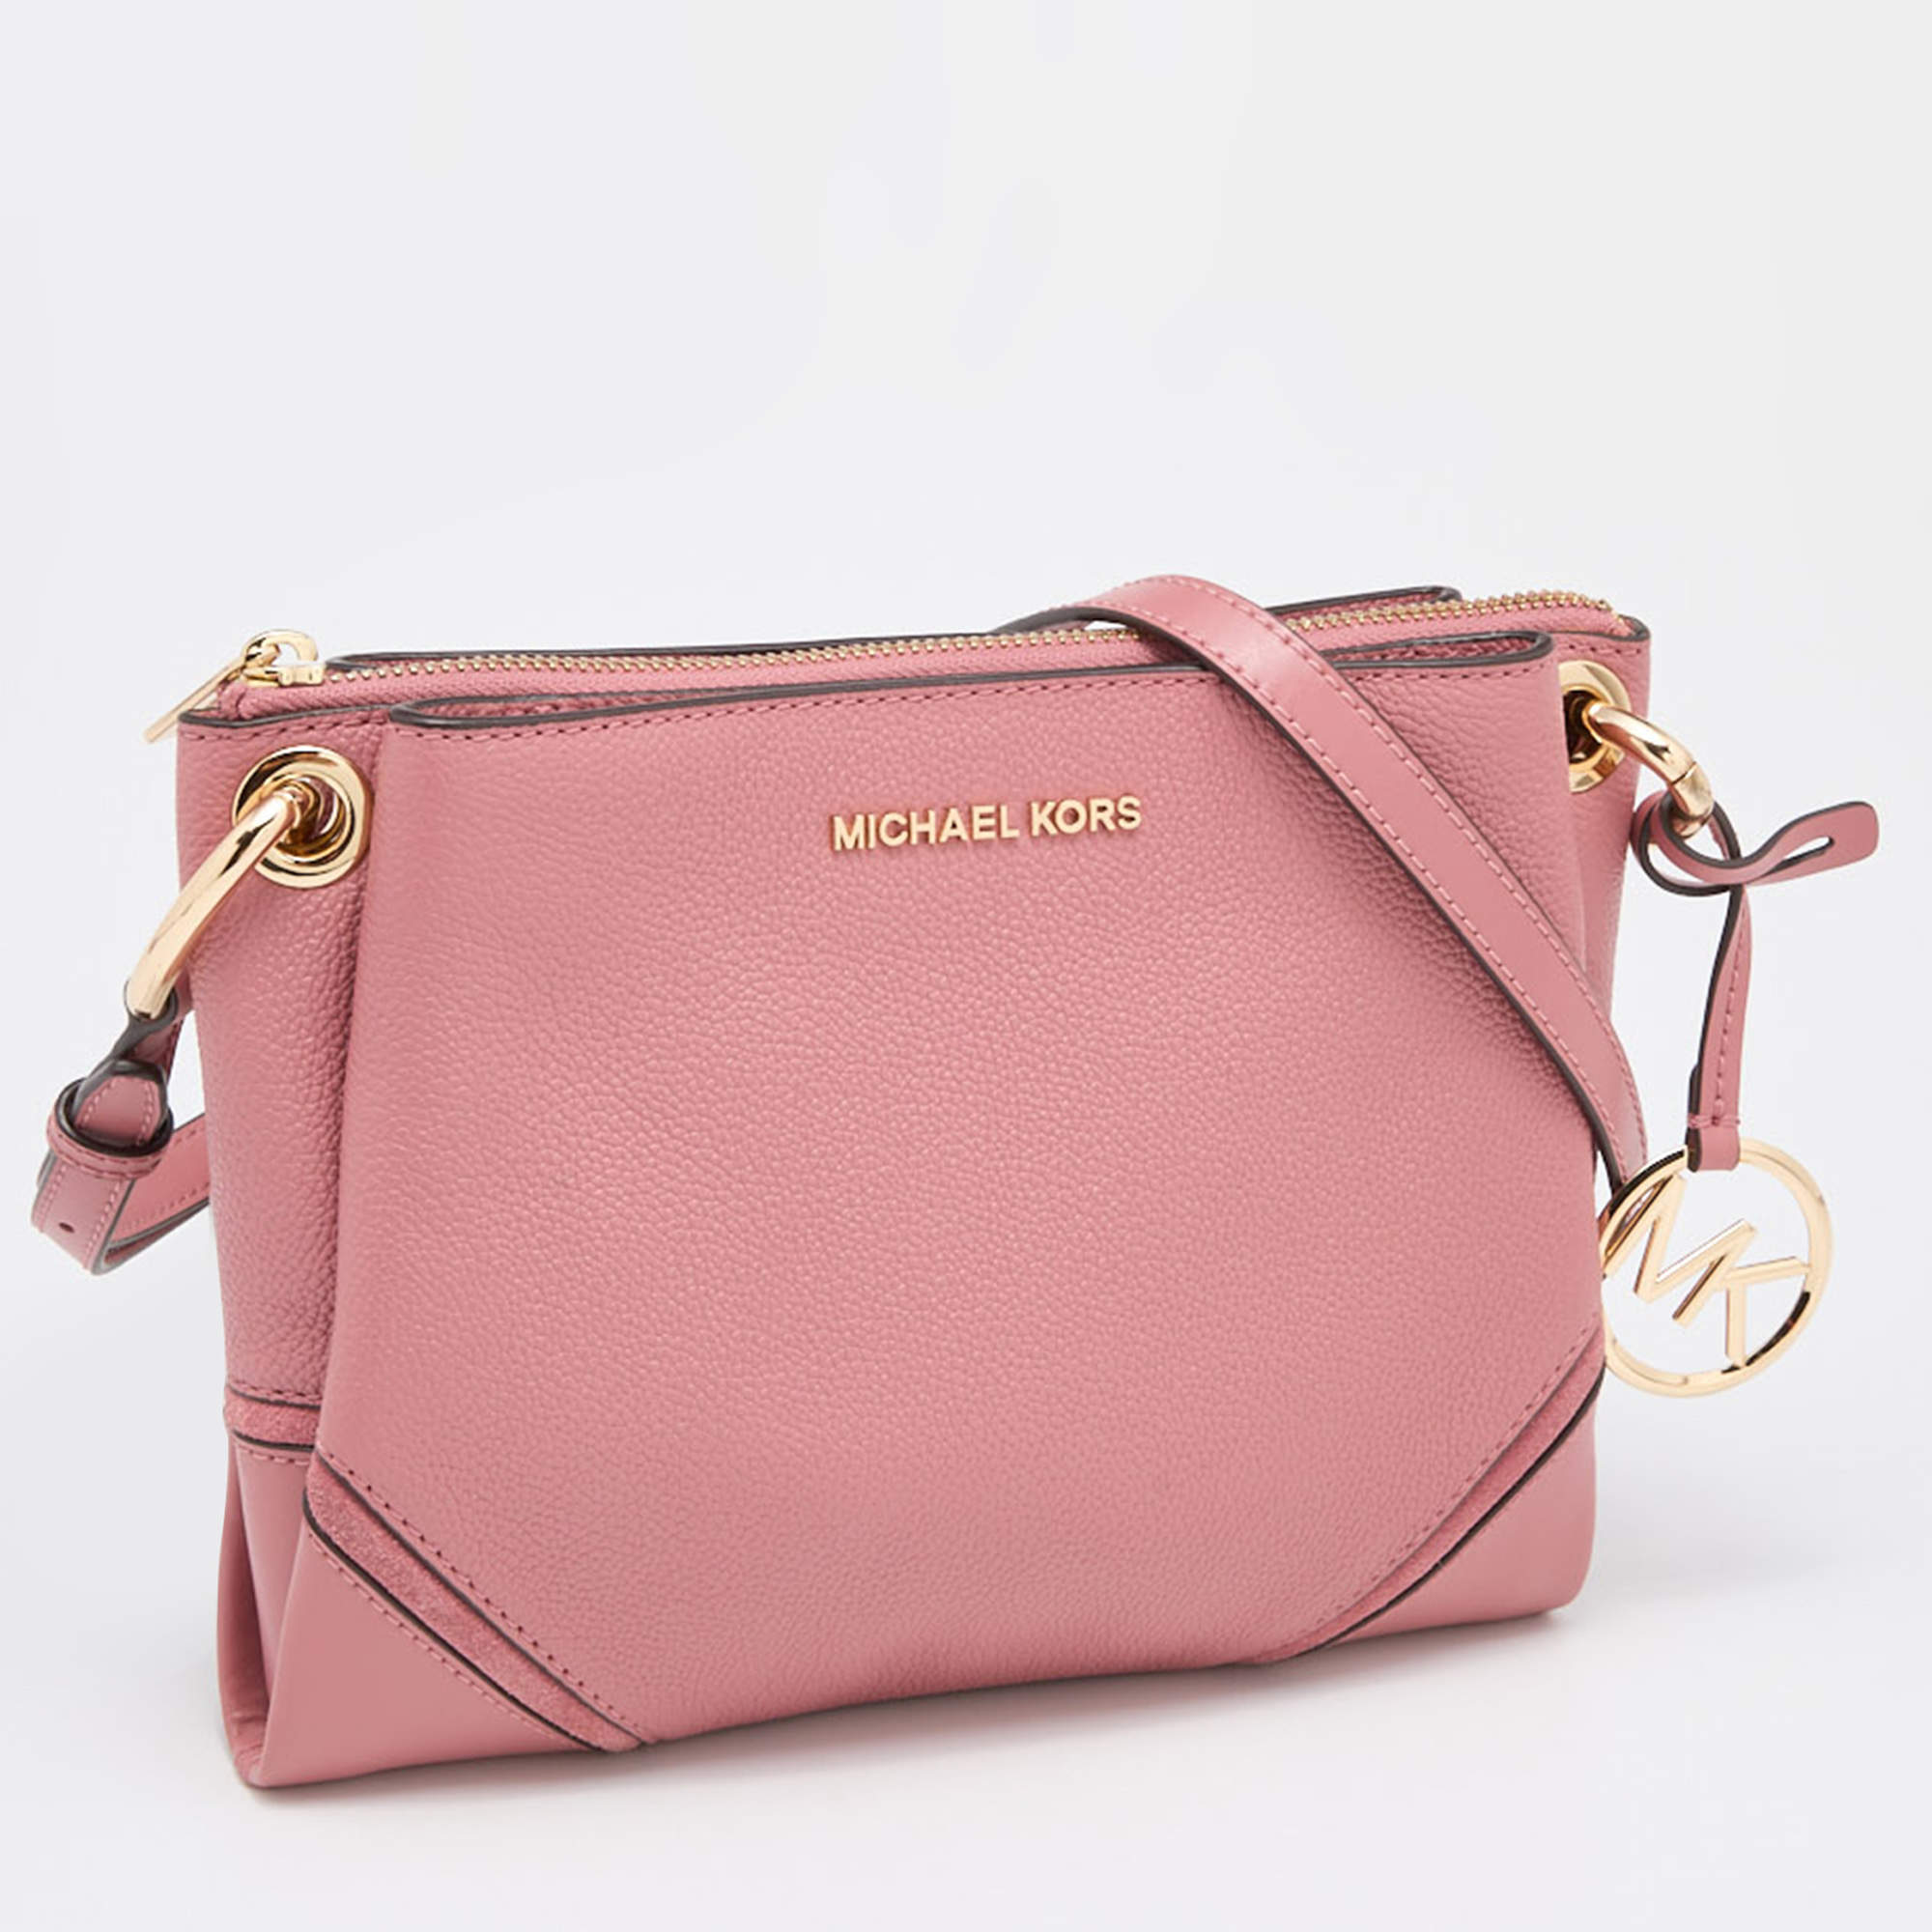 NEW Baby Pink Michael Kors crossbody purse! Our price is only